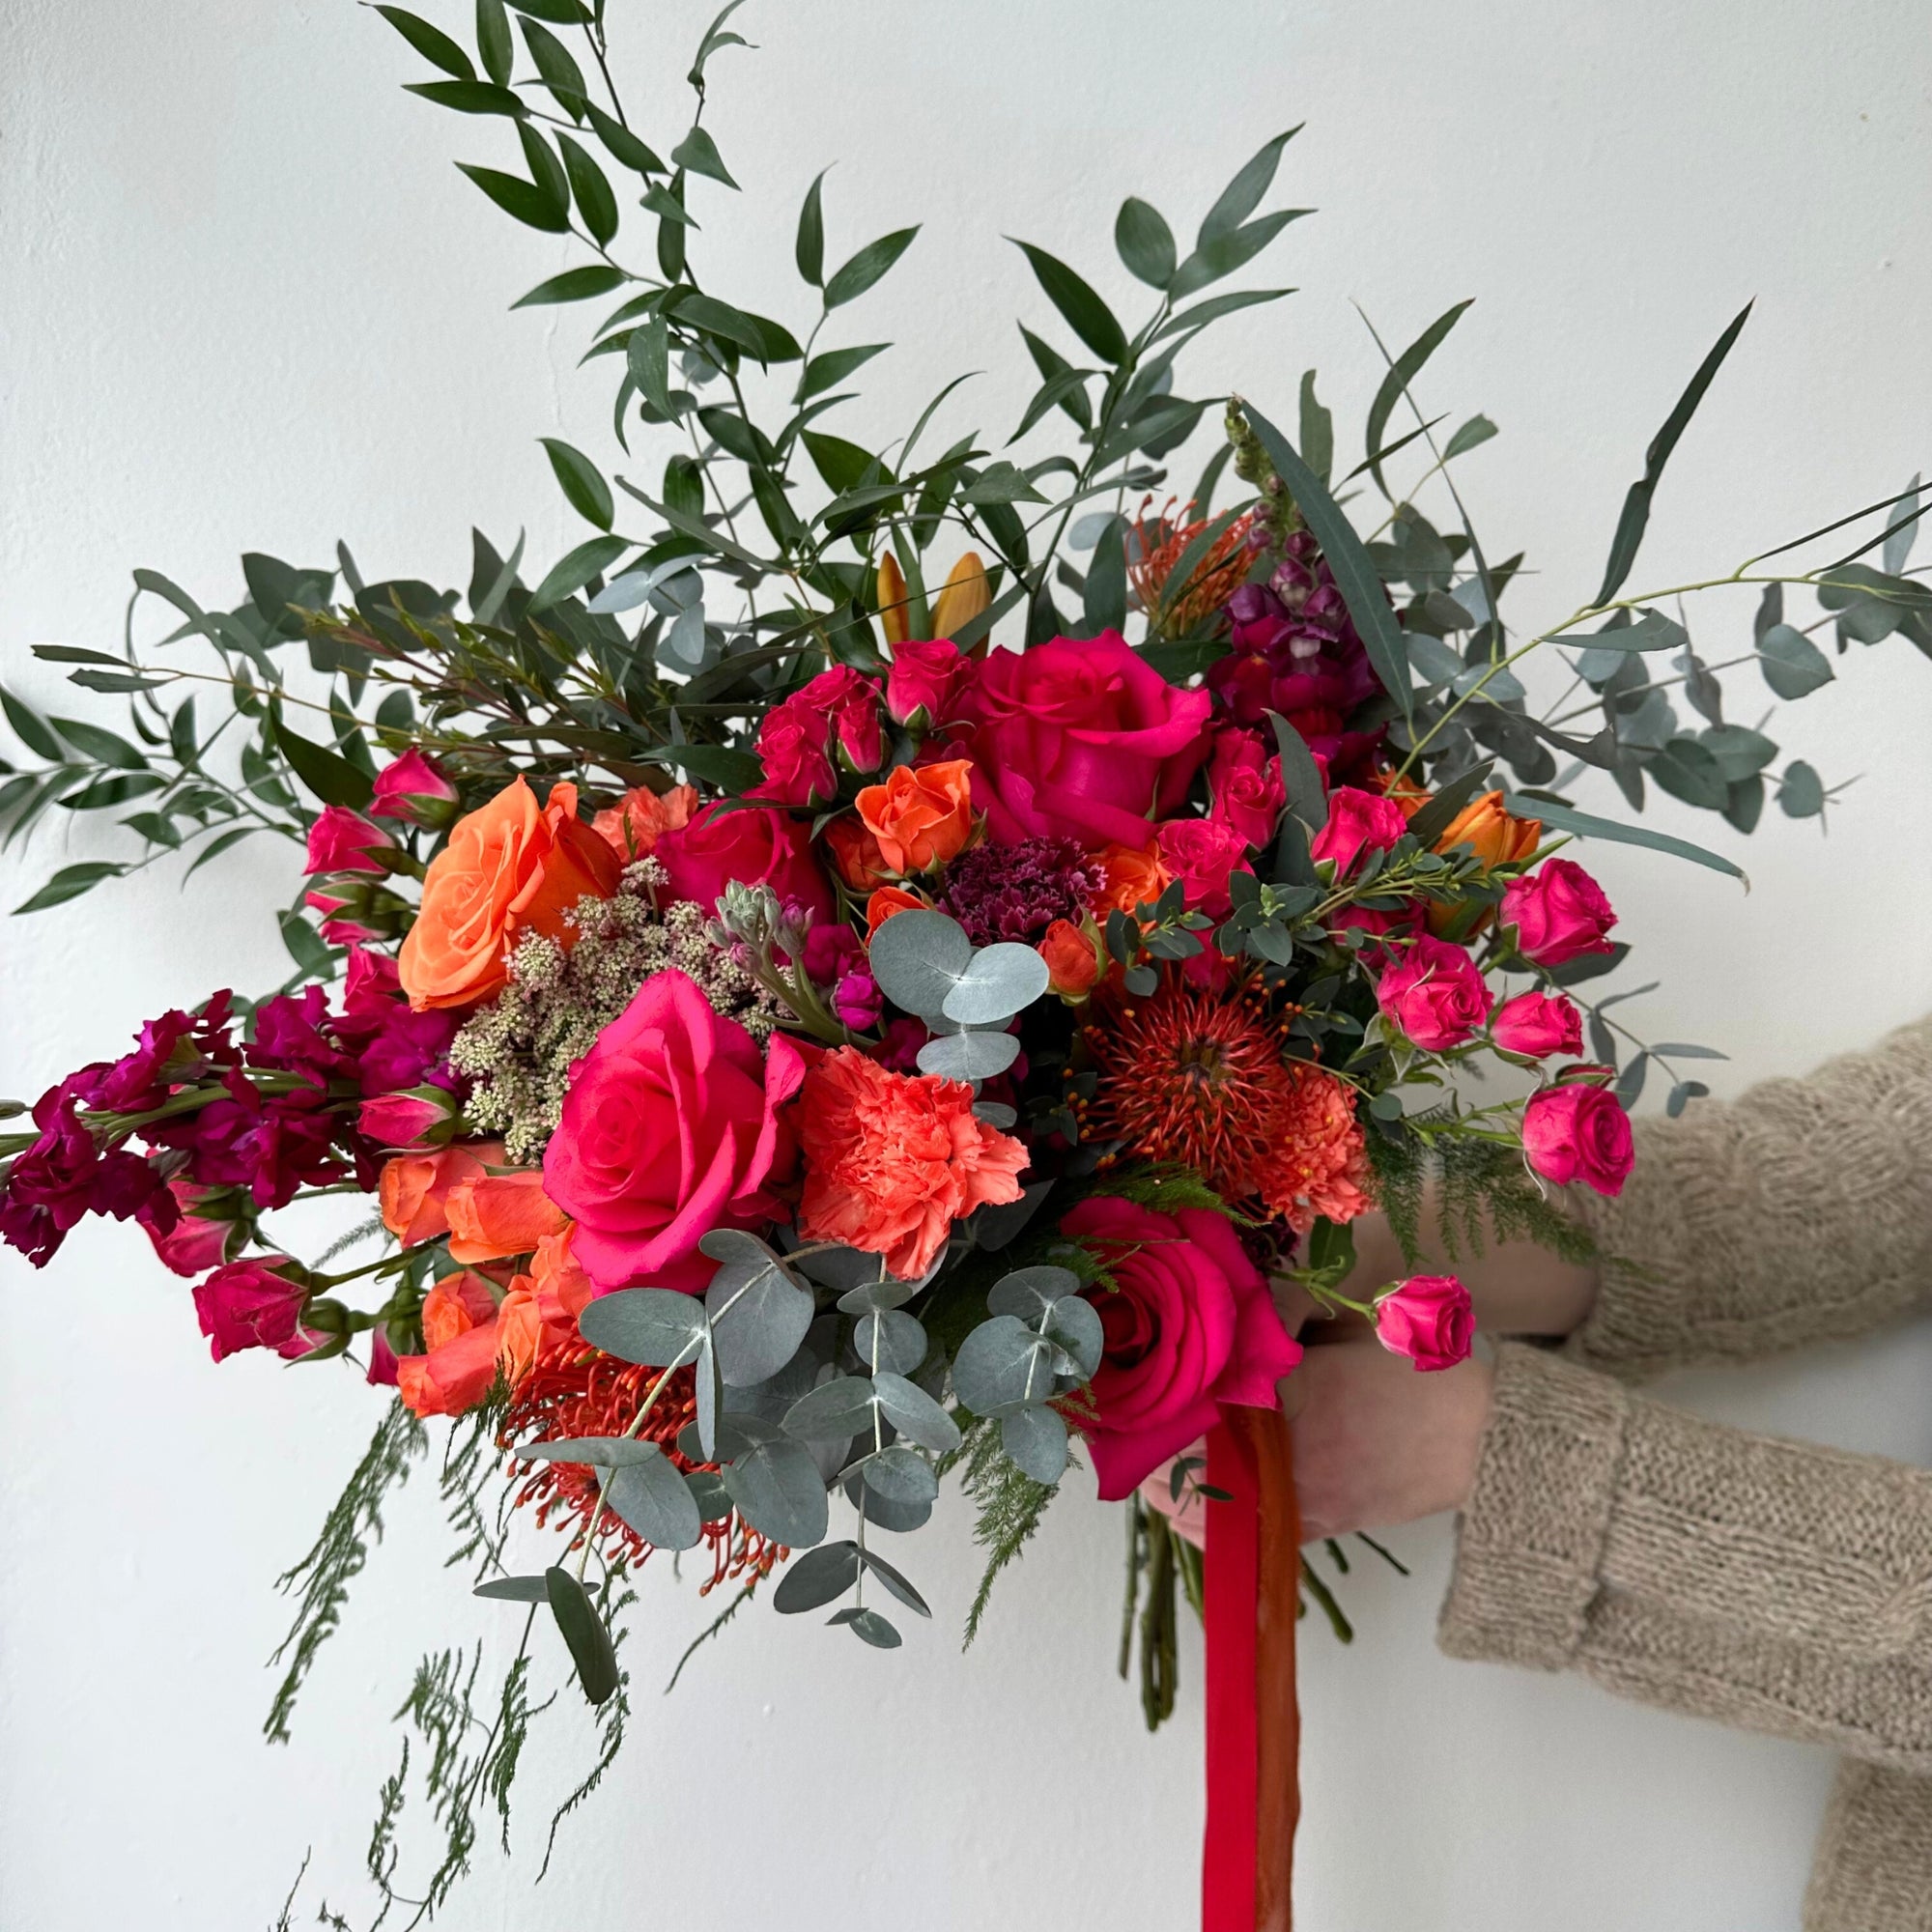 J'Adore Hand-Tied Bouquet